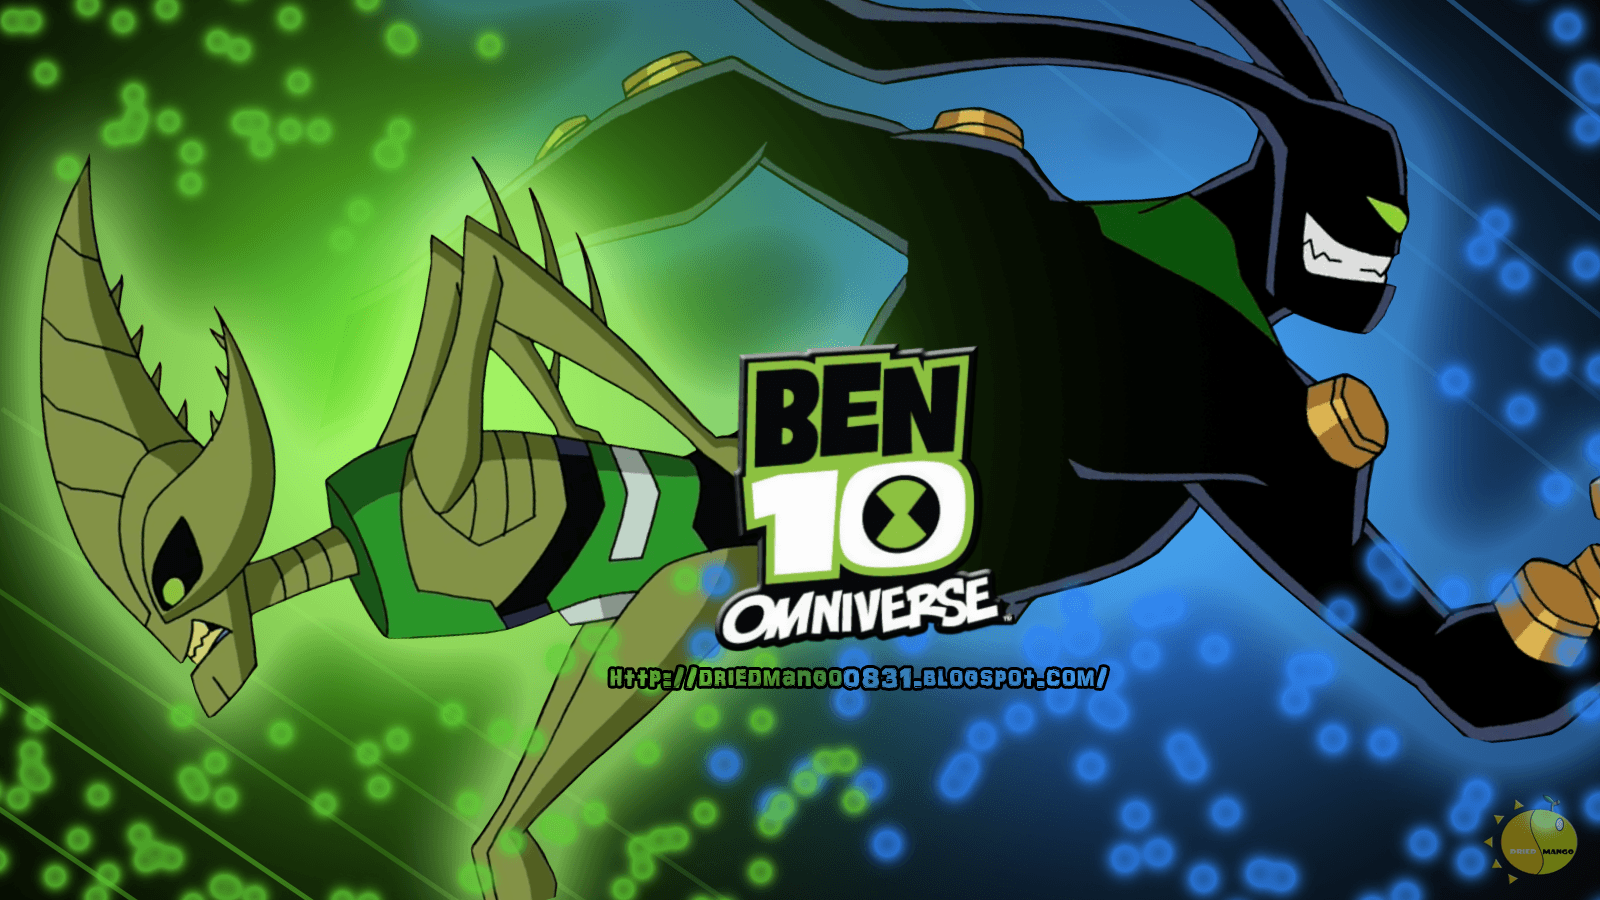 Ben 10 Alien Force Wallpaper I made with an image I really like of Ben : r/ Ben10